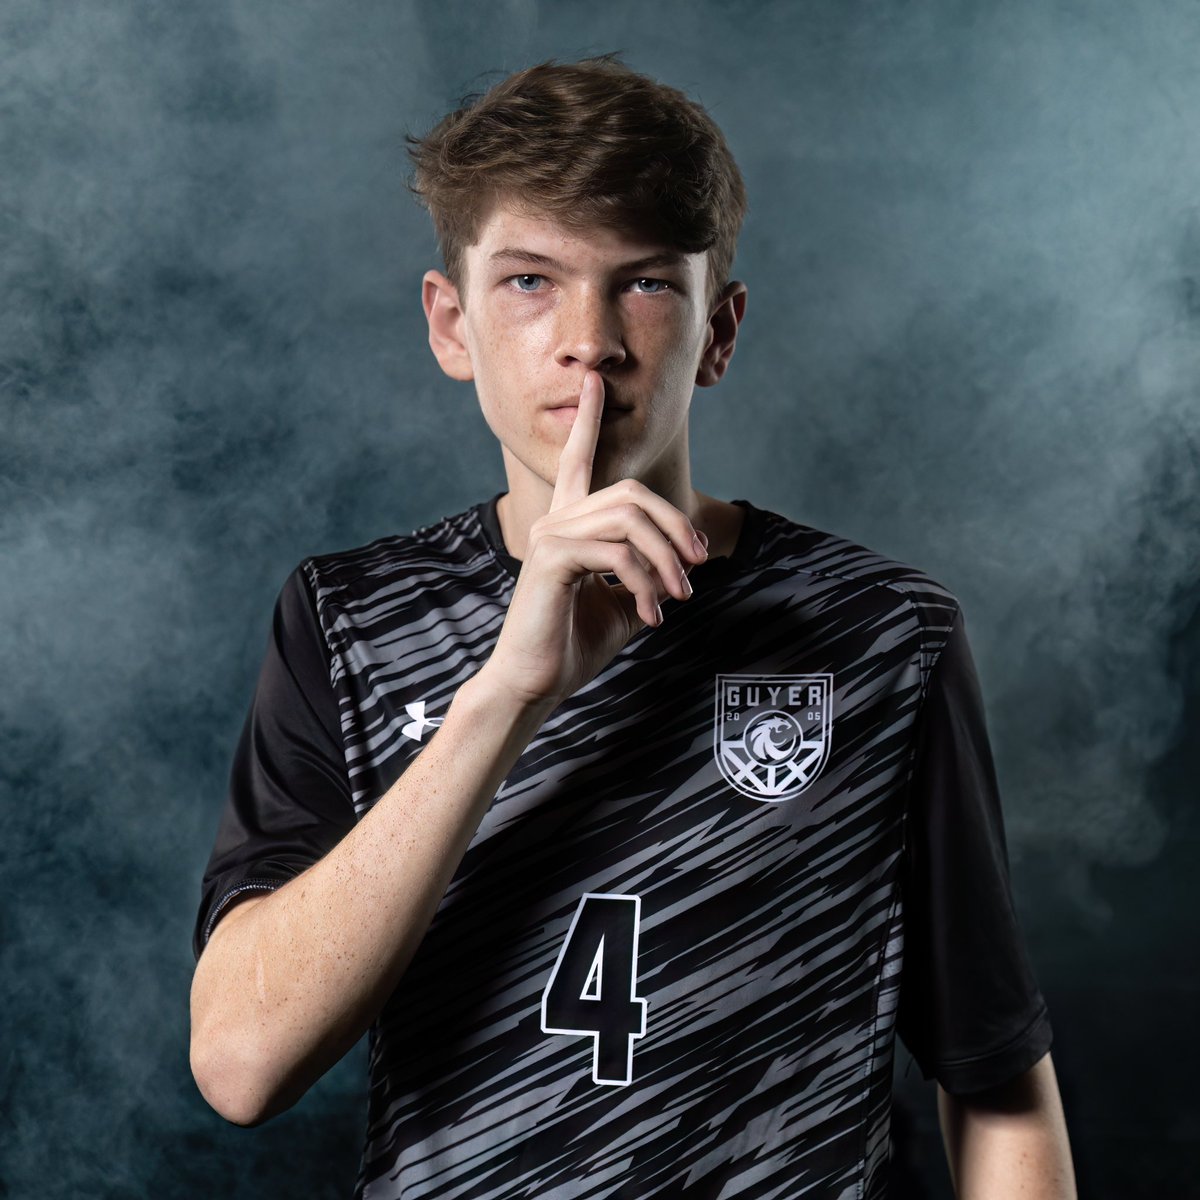 Media Day with the Guyer Boys Varsity Soccer team. We got a little moody this time & I’m loving it. 

#guyer #guyersoccer #varsity #varsitysoccer #boysvarsitysoccer #wildcatsoccer #pixrguy #mediaday #wildcats #canonshooter #godox #godoxlighting #rfshooters